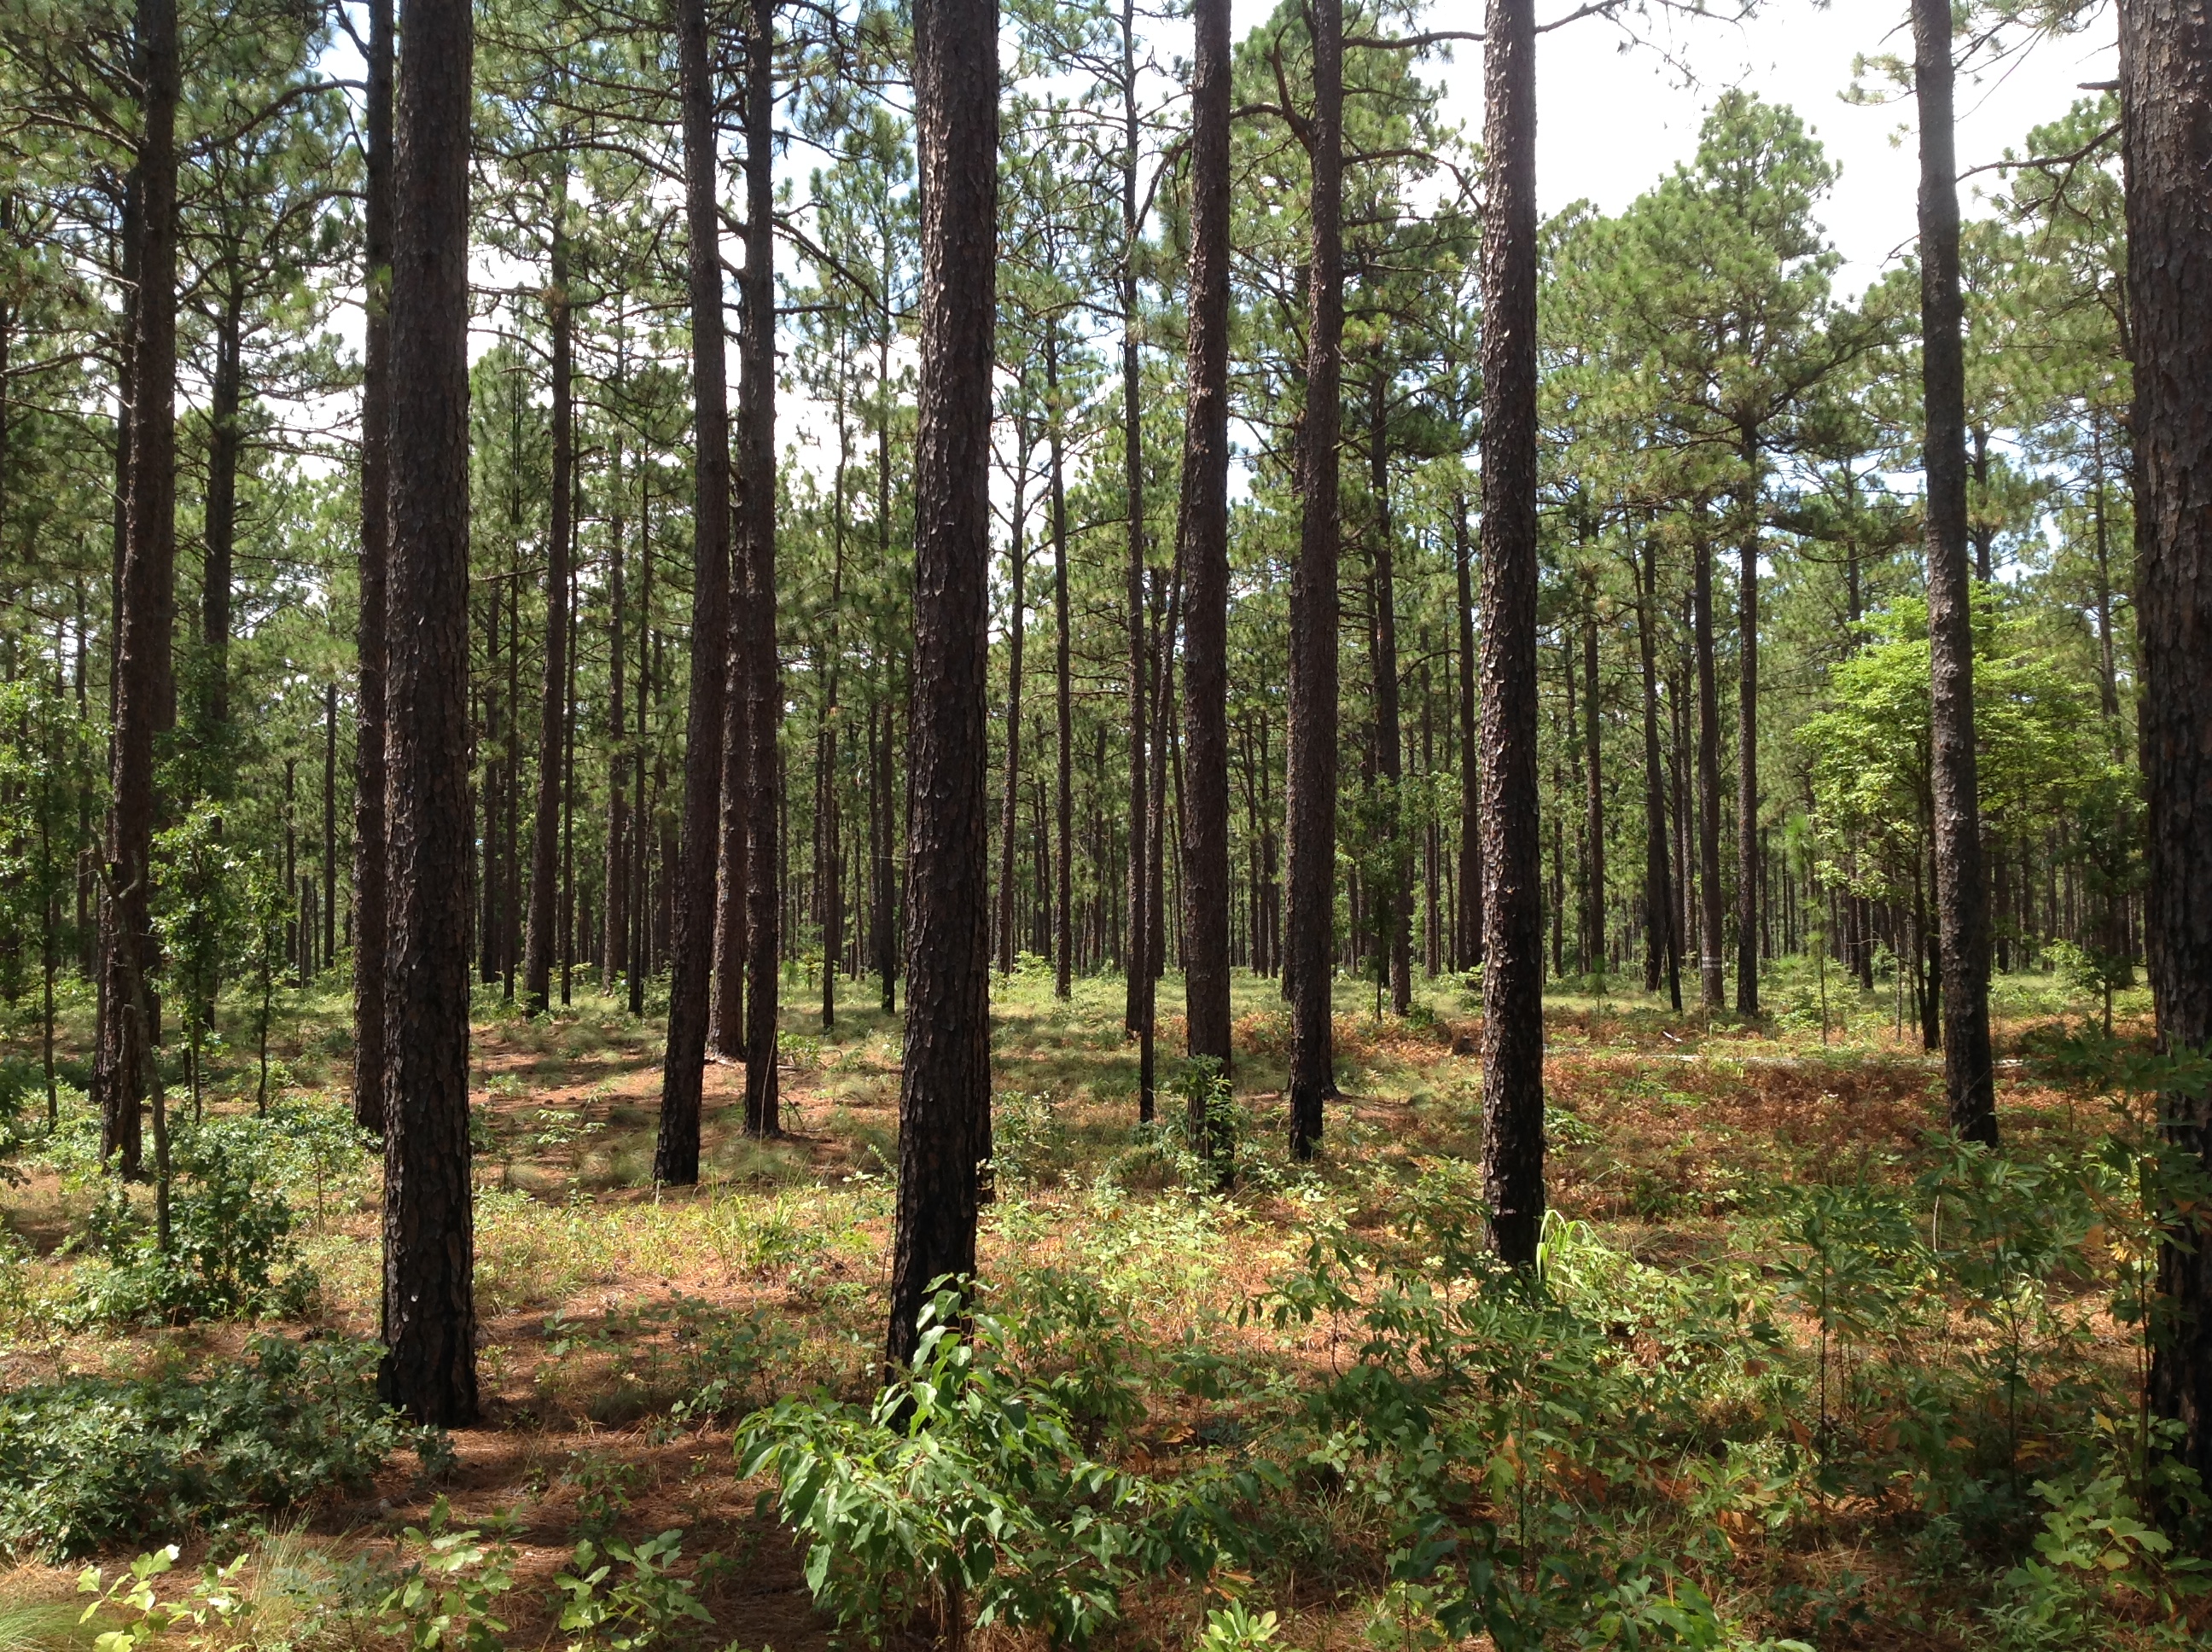 Finding Longleaf Pine in American History - Edge Effects